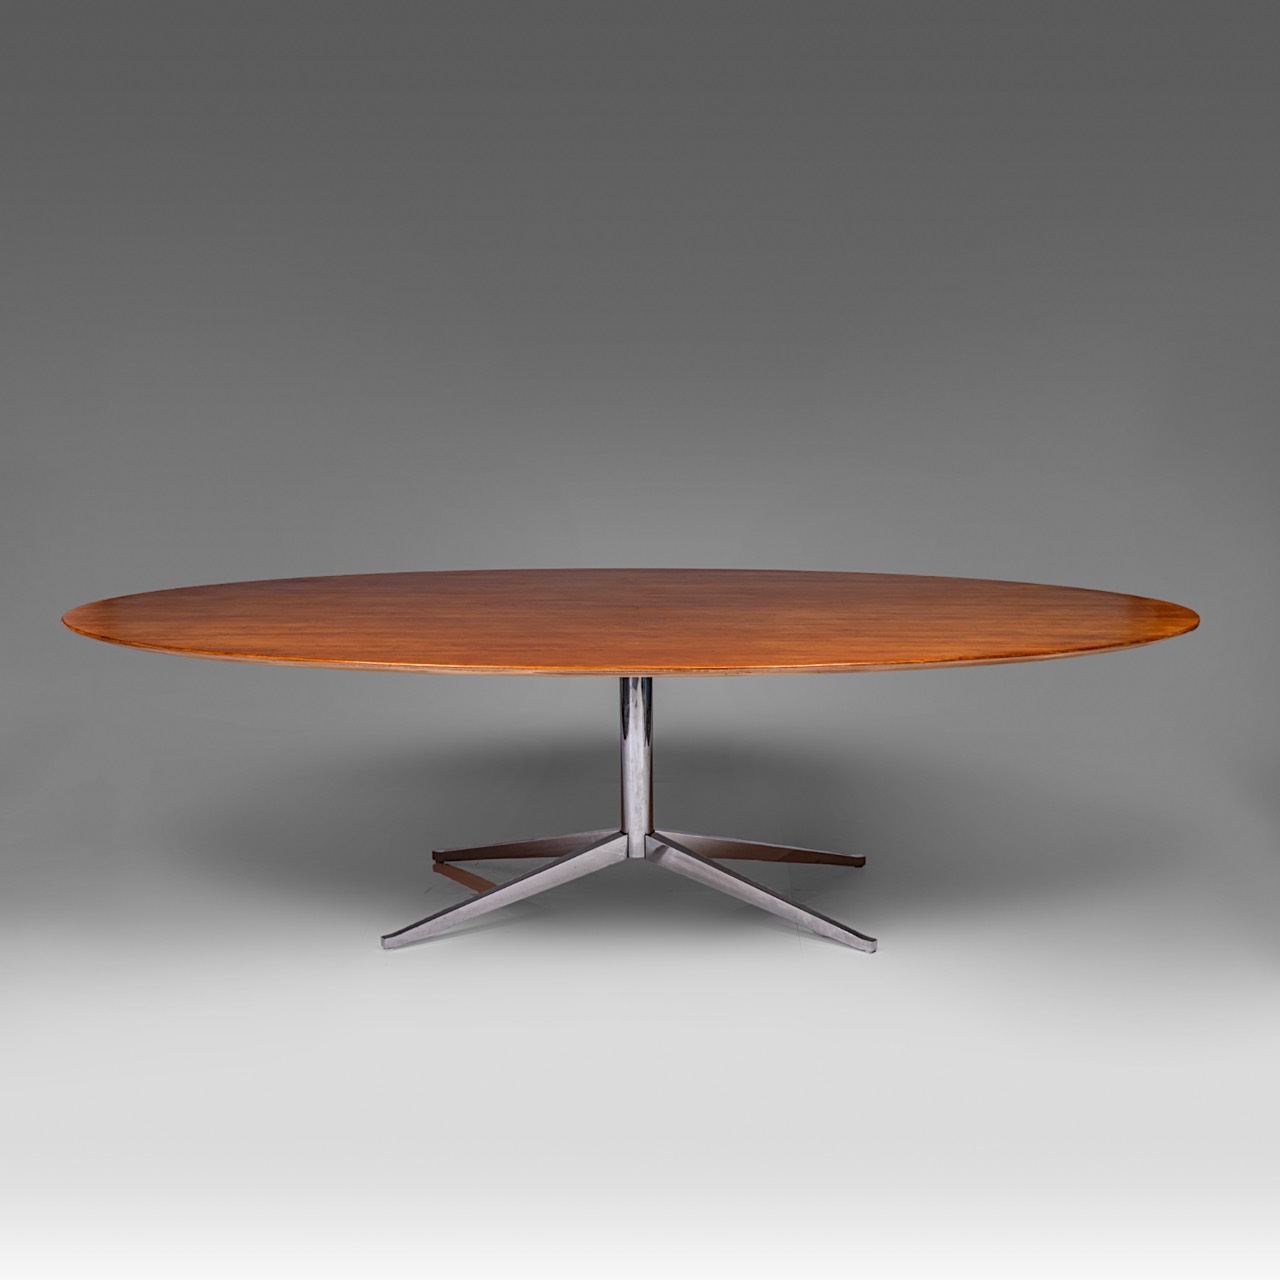 A design dining table by Florence Knoll, walnut table top on a chromed metal frame, H 72 - W 200 - D - Image 2 of 6